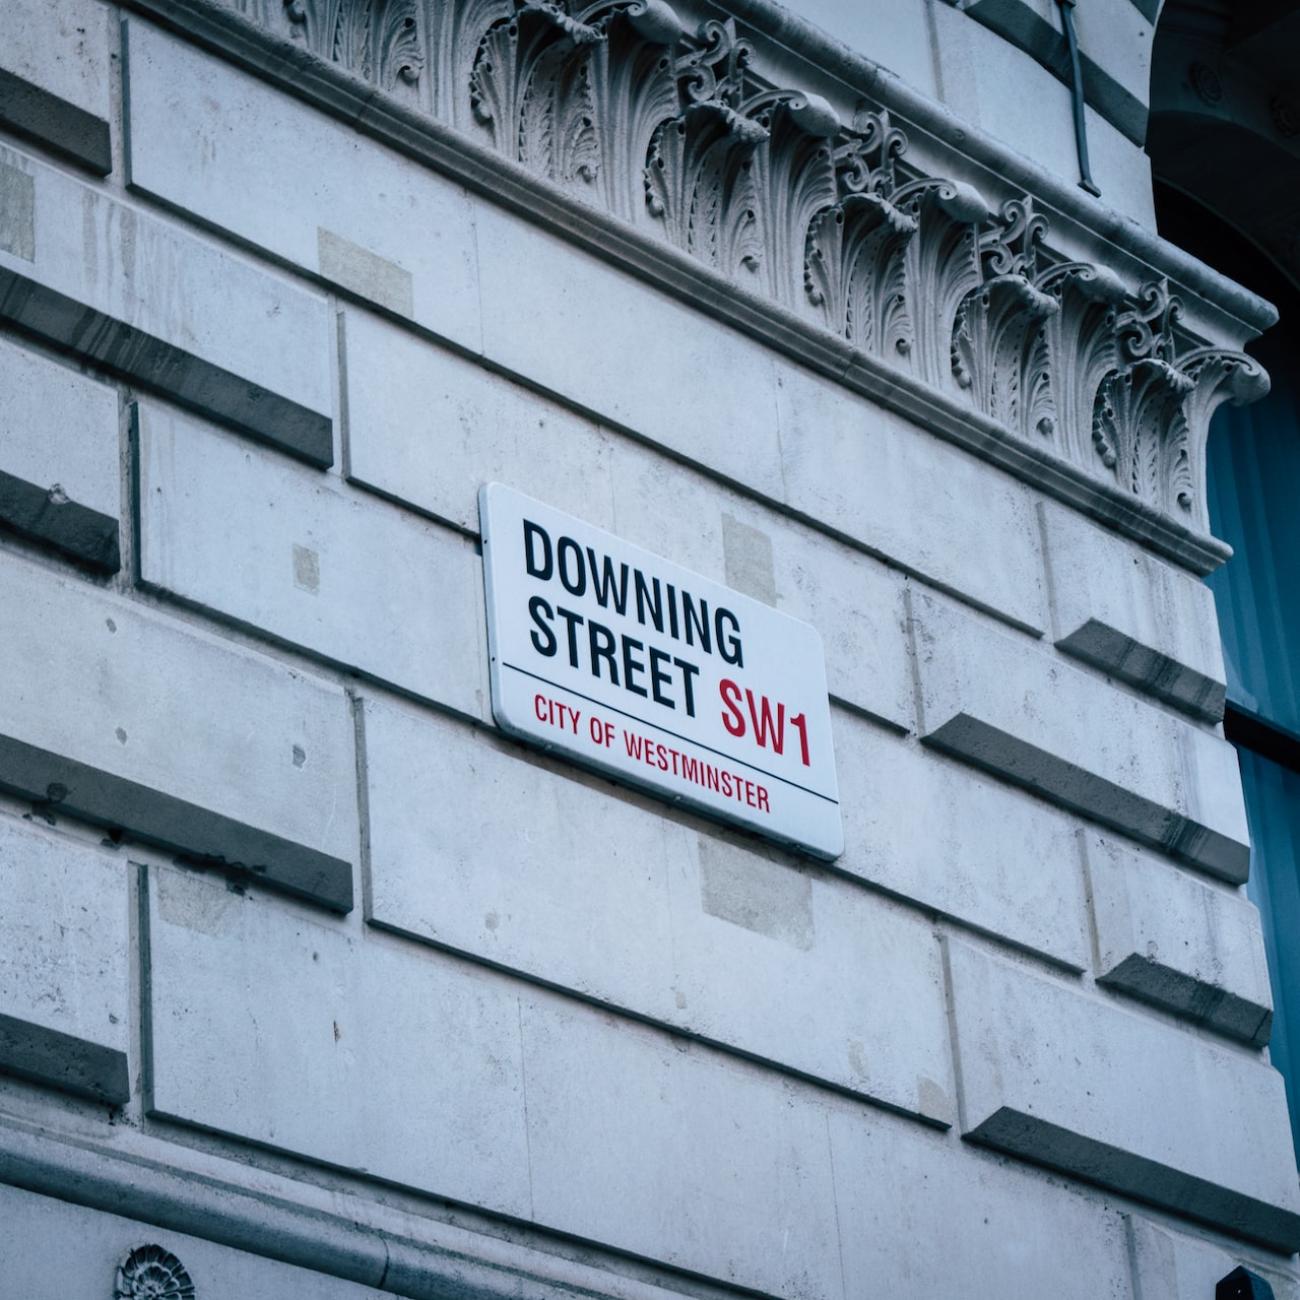 A sign on a white neo-classical building says Downing Street, which is where the UK Prime Minister and Government departments are based